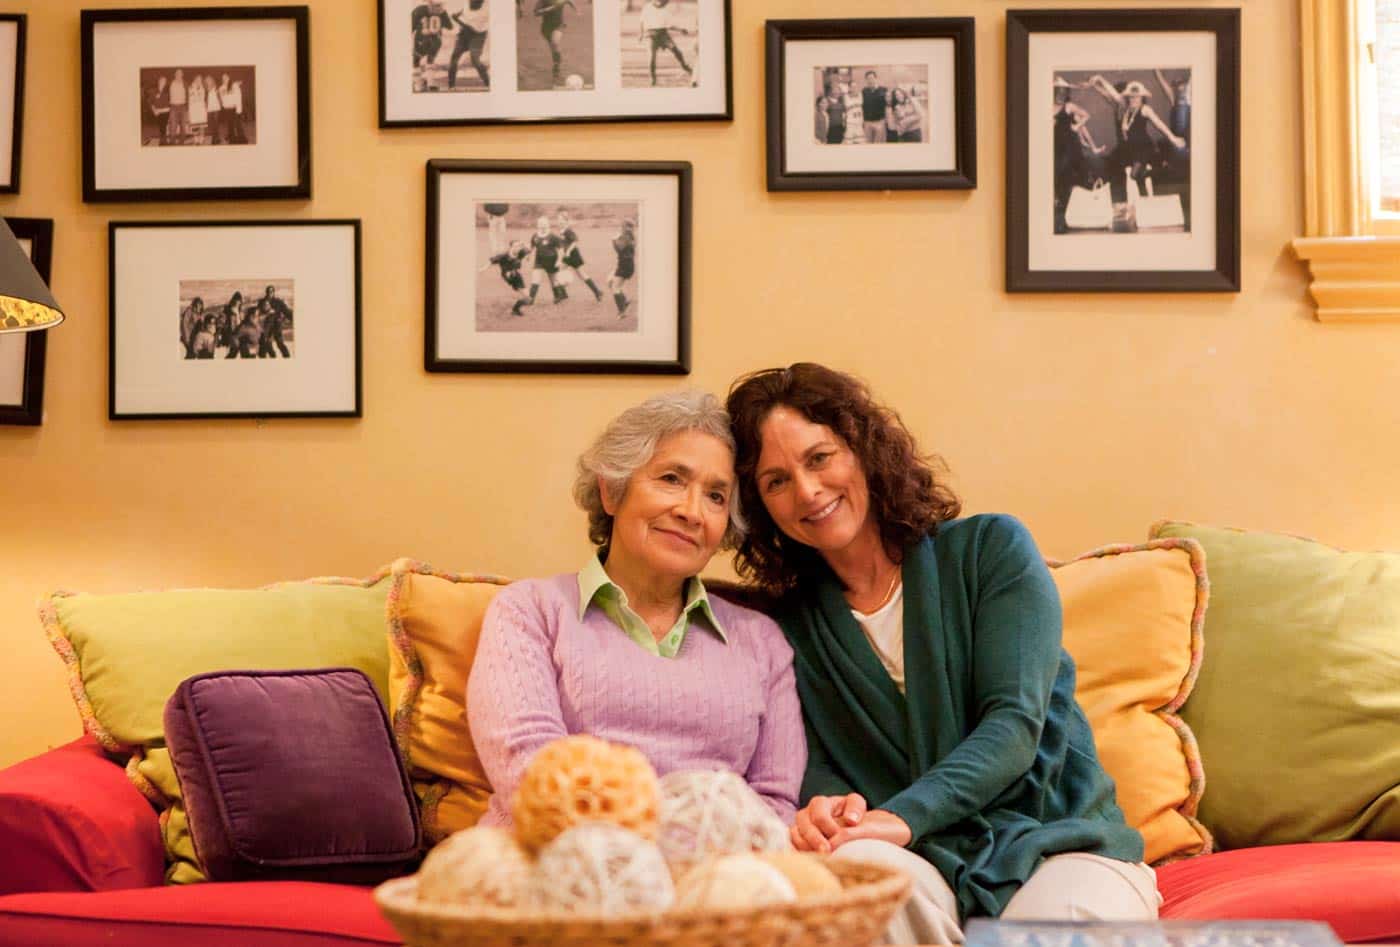 mother and daugther on couch with pictures on wall alzheimers